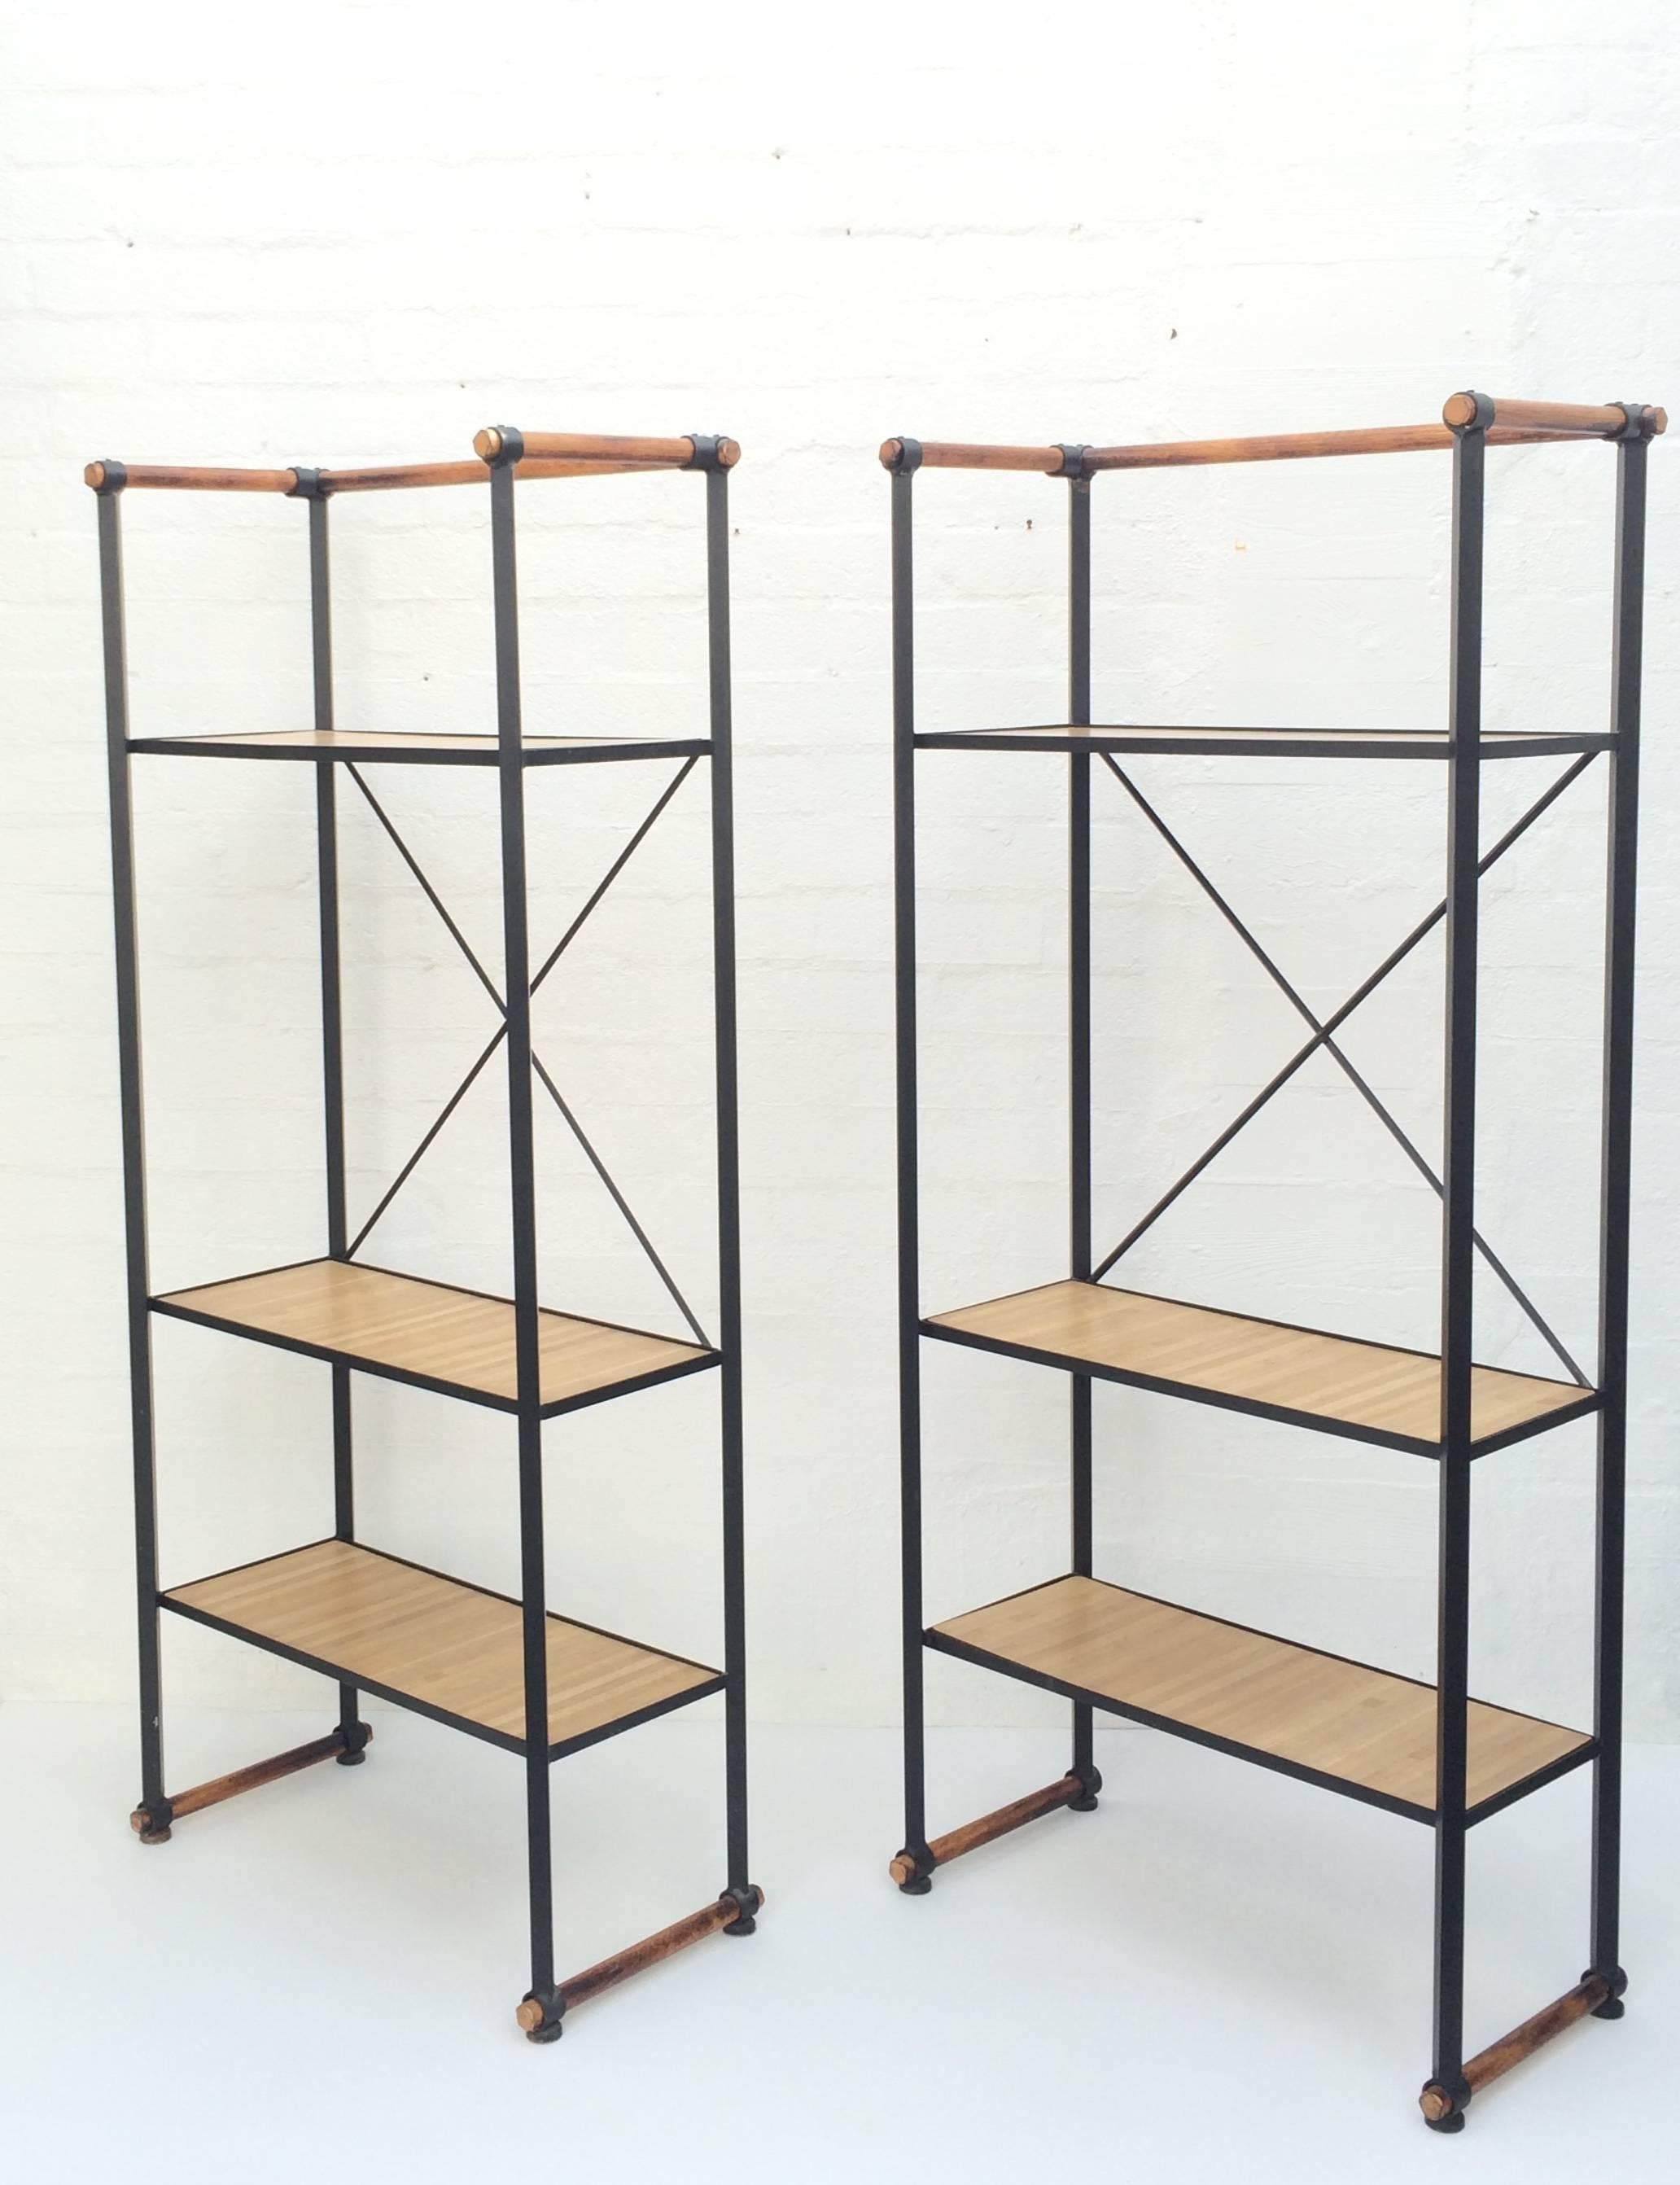 For your consideration a pair of rare Etageres designed by Cleo Baldon. 
These freestanding shelfs consist of a wrought iron stand with Cleo's signature oak wood accents at the top and bottom. 
Each stand has the original three removable inset